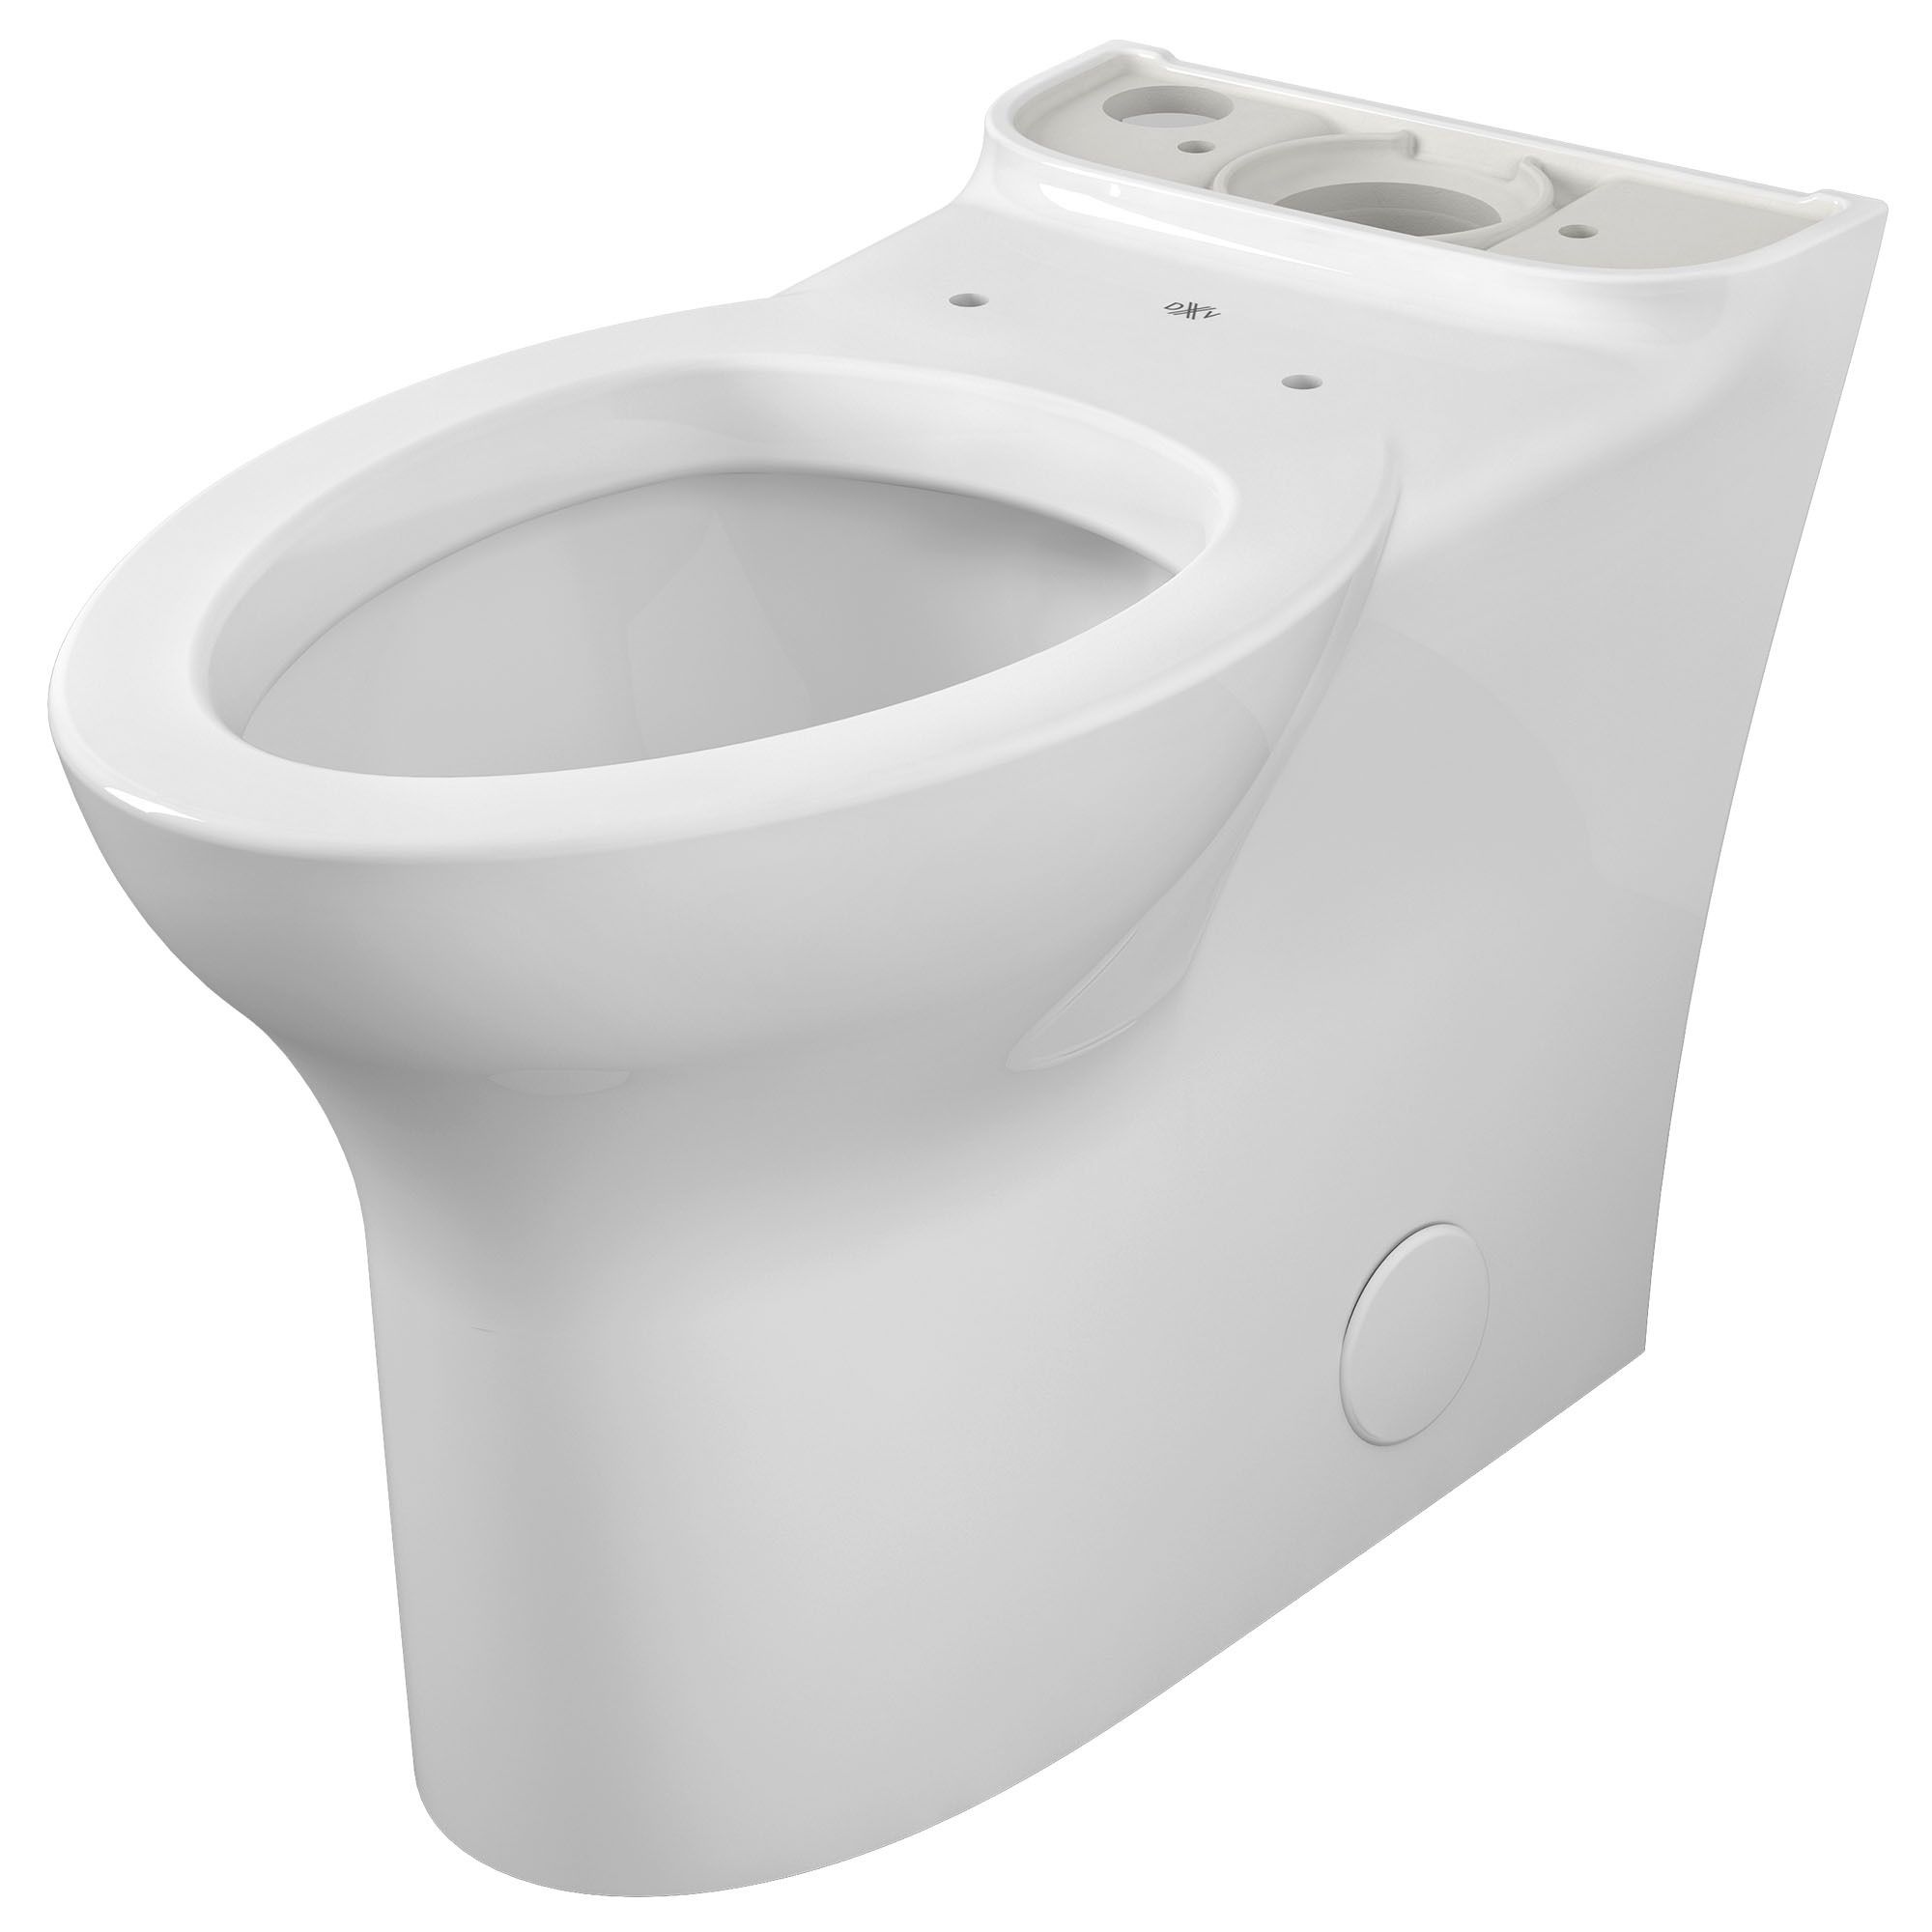 Equility™ Chair Height Elongated Toilet Bowl with Seat